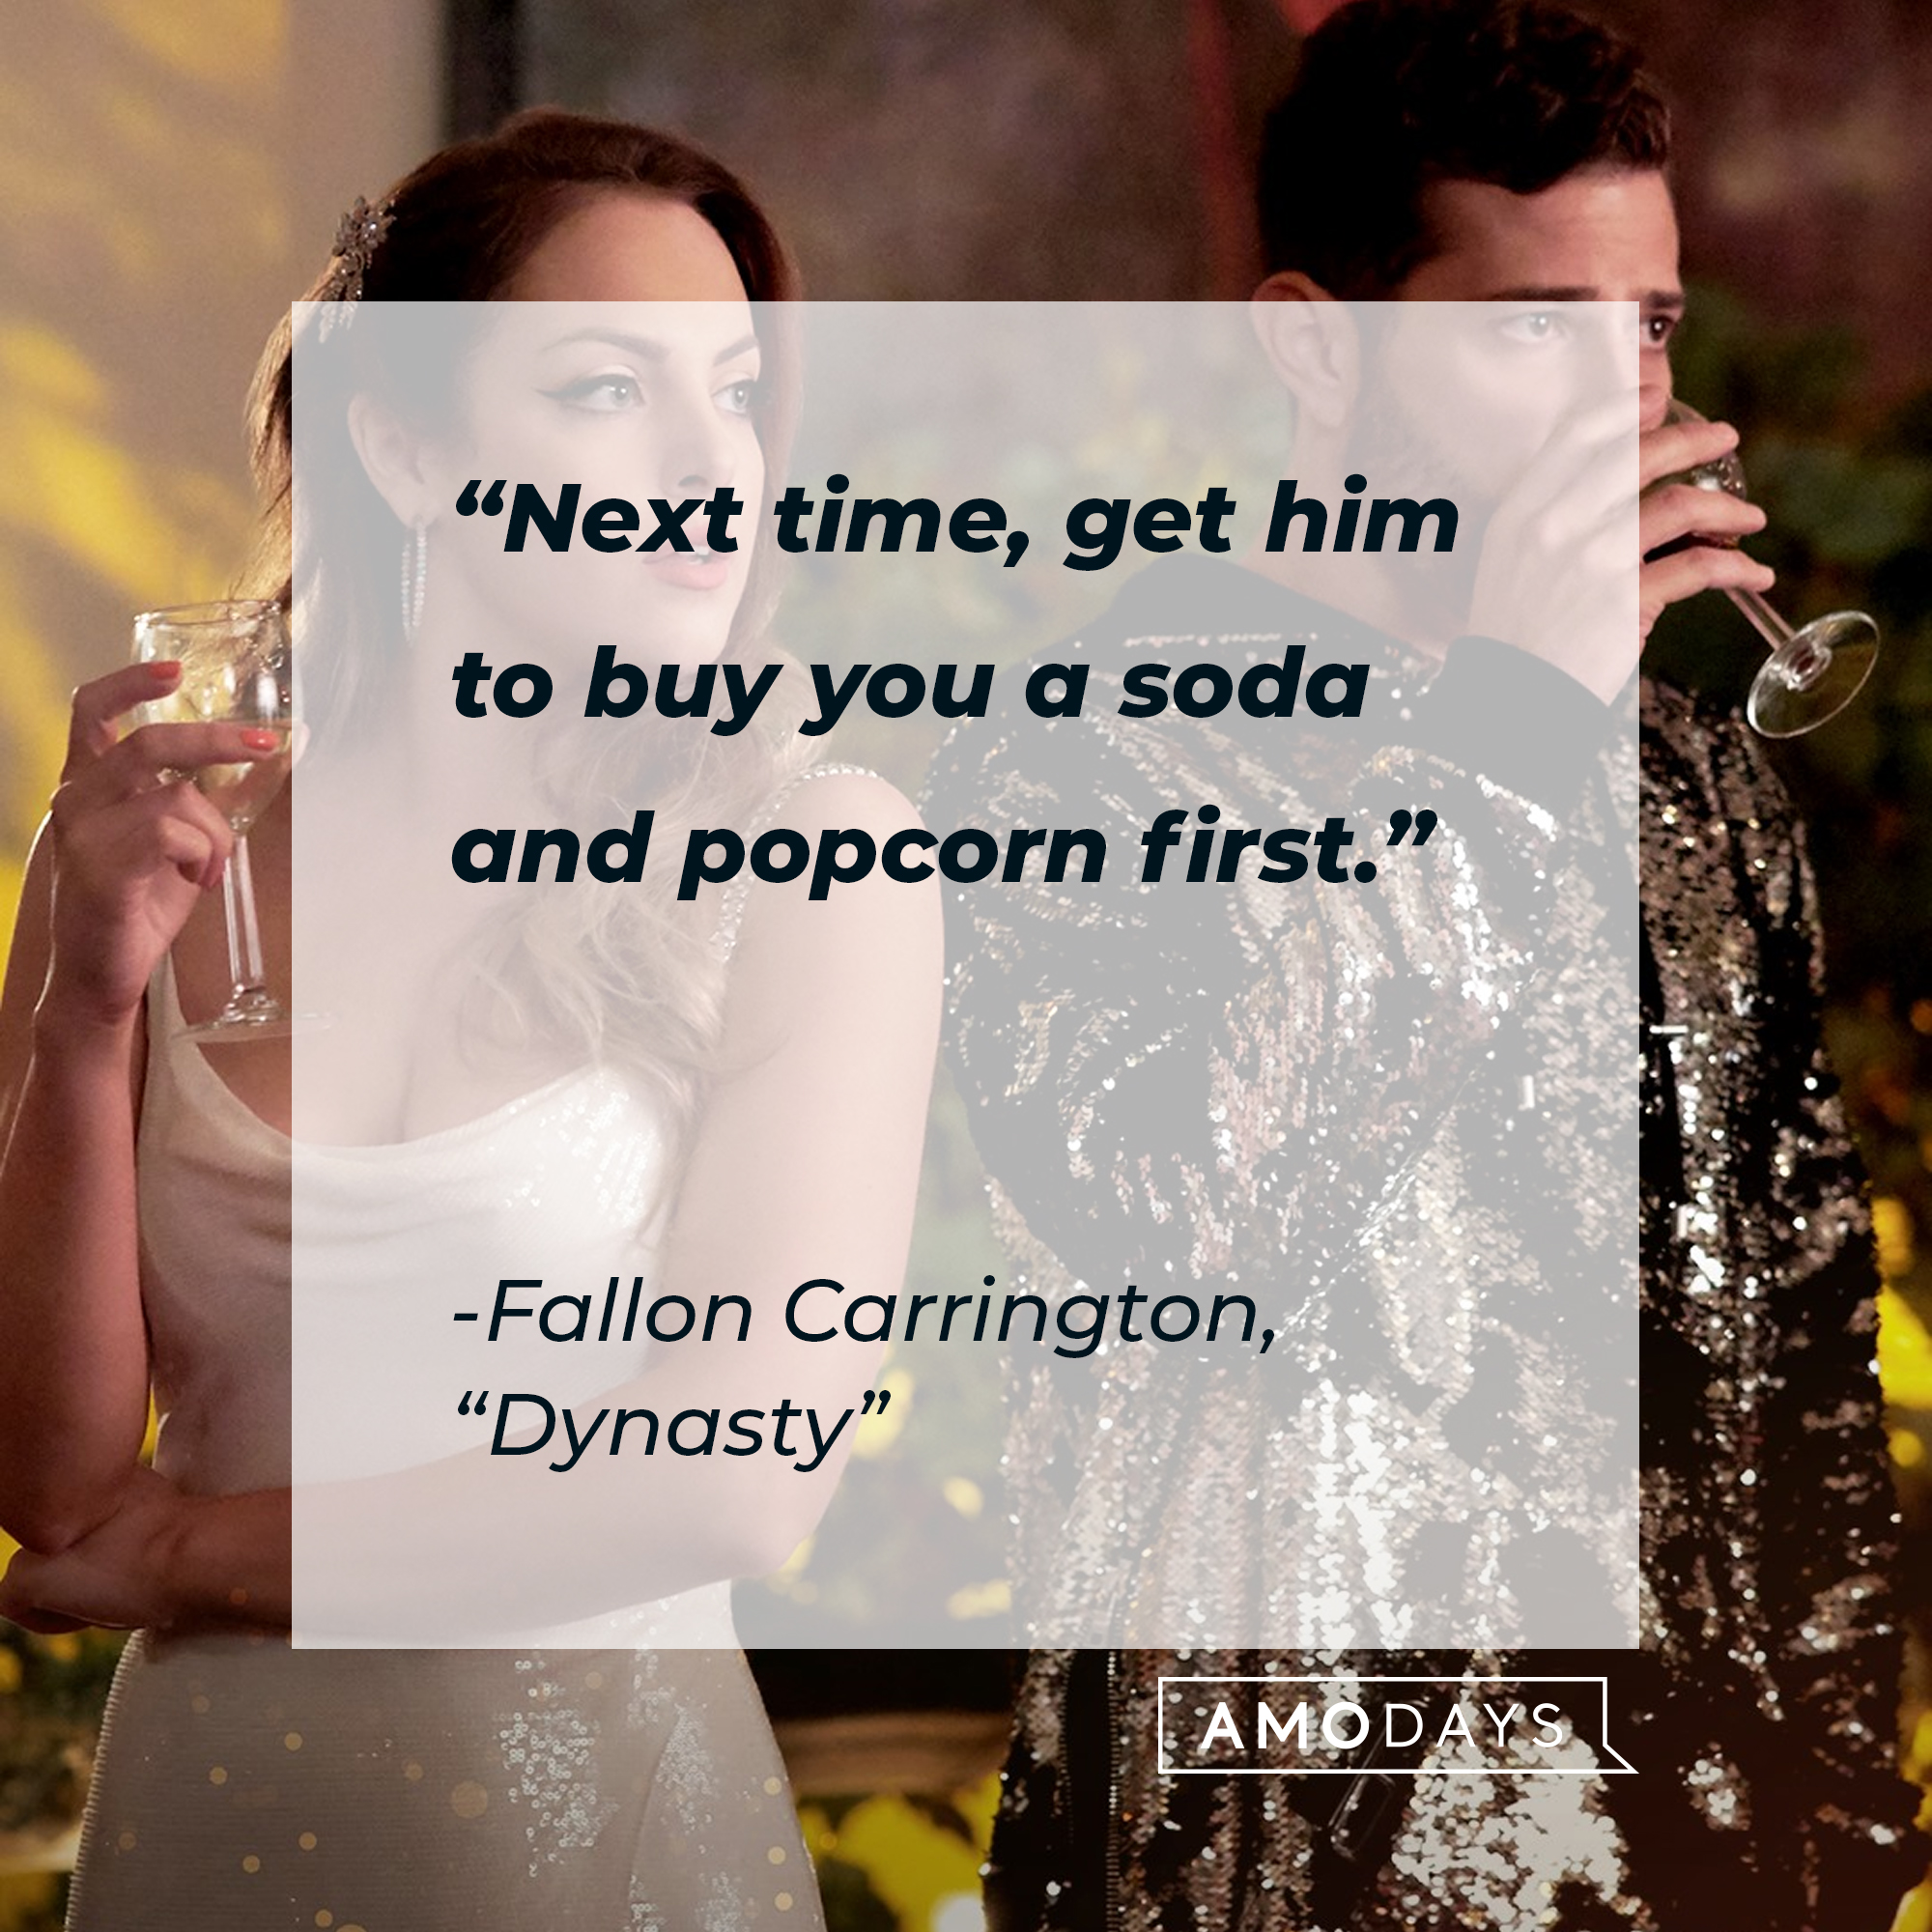 Fallon Carrington’s quote from “Dynasty”: “Next time, get him to buy you a soda and popcorn first.” | Source: facebook.com/DynastyOnTheCW